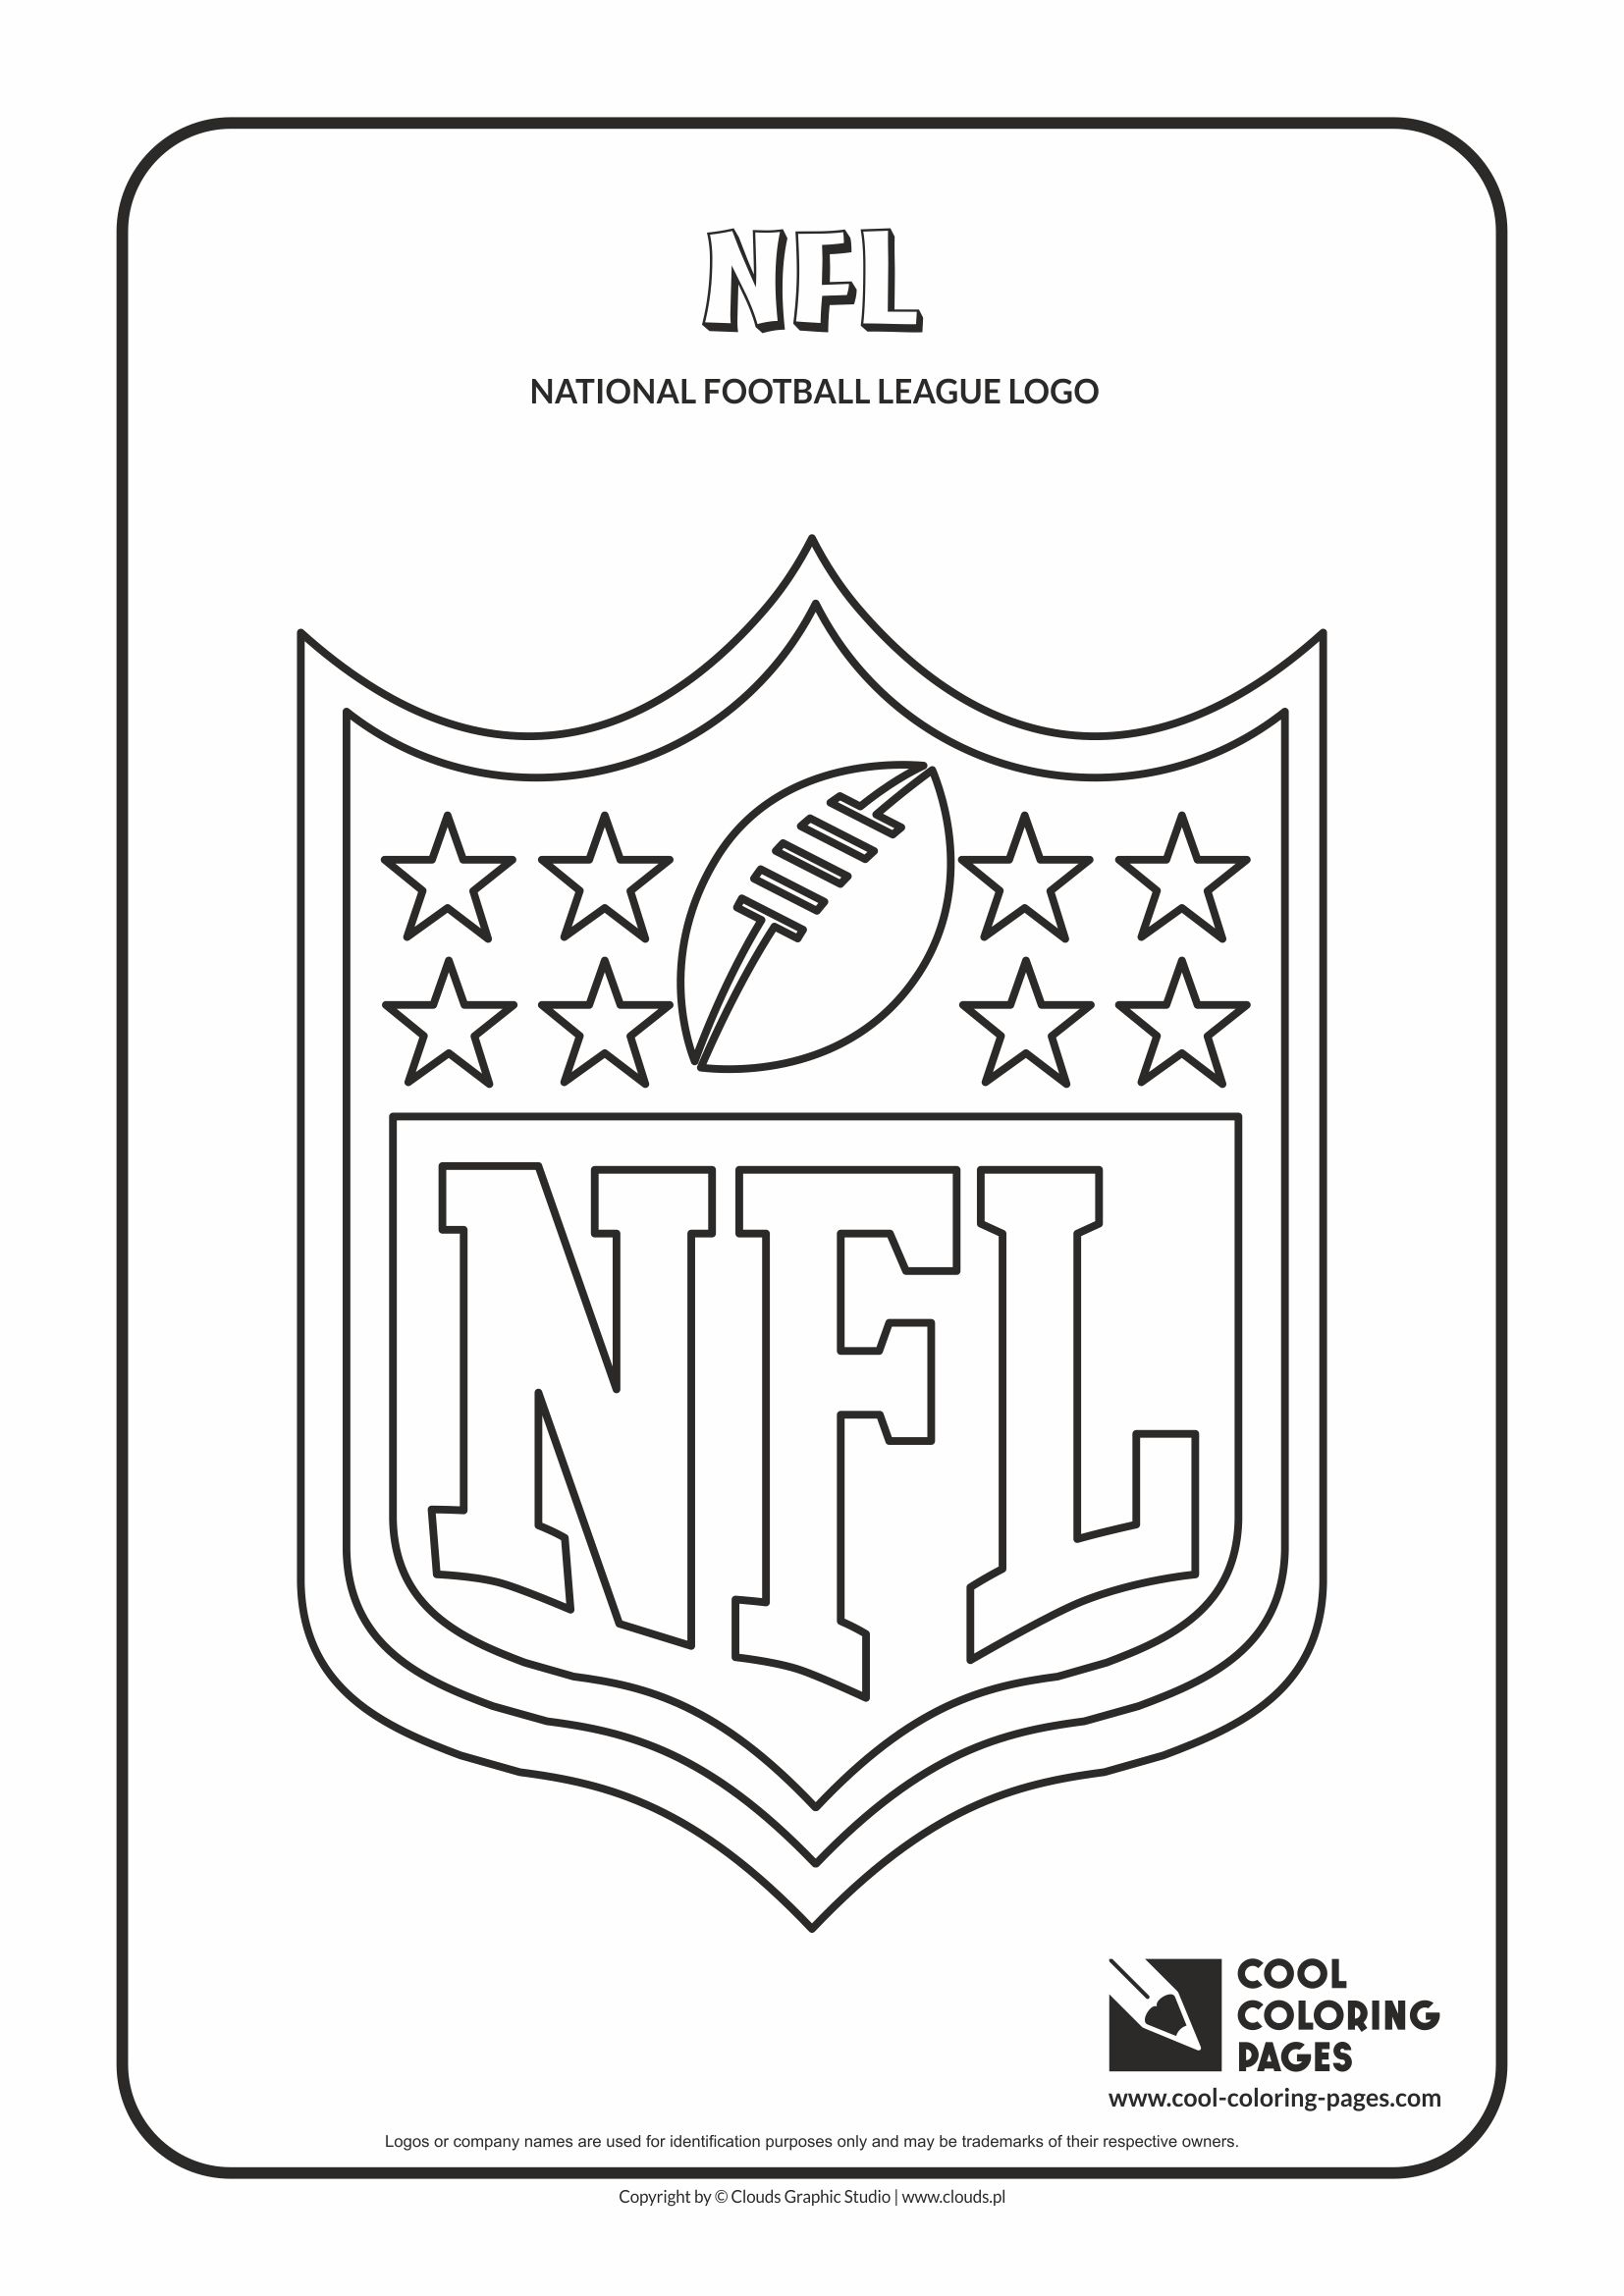 cool-coloring-pages-nfl-teams-logos-coloring-pages-cool-coloring-pages-free-educational